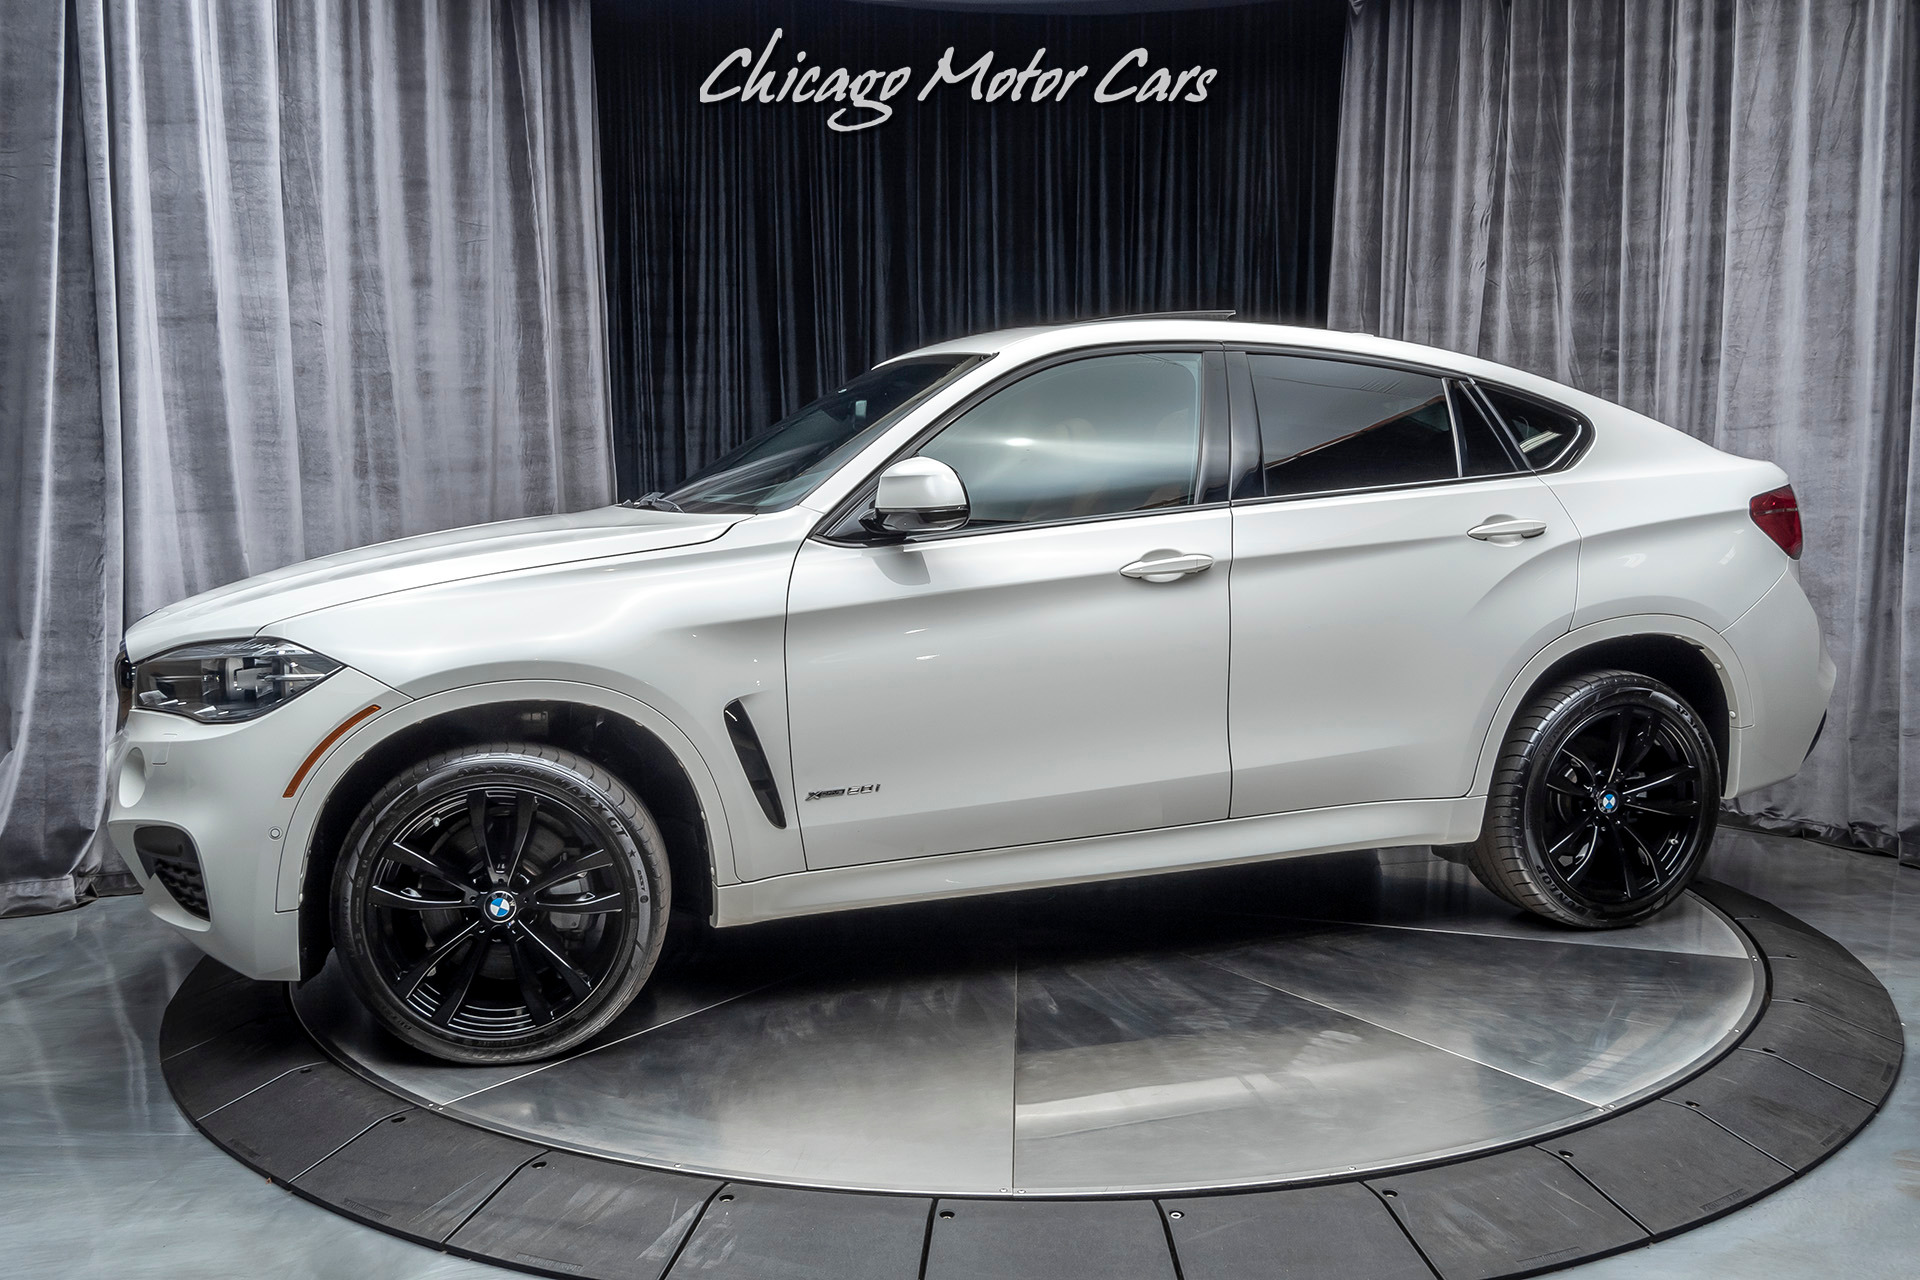 Used-2017-BMW-X6-xDrive50i-SUV-MSRP-91845-EXECUTIVE---M-SPORT-PACKAGES